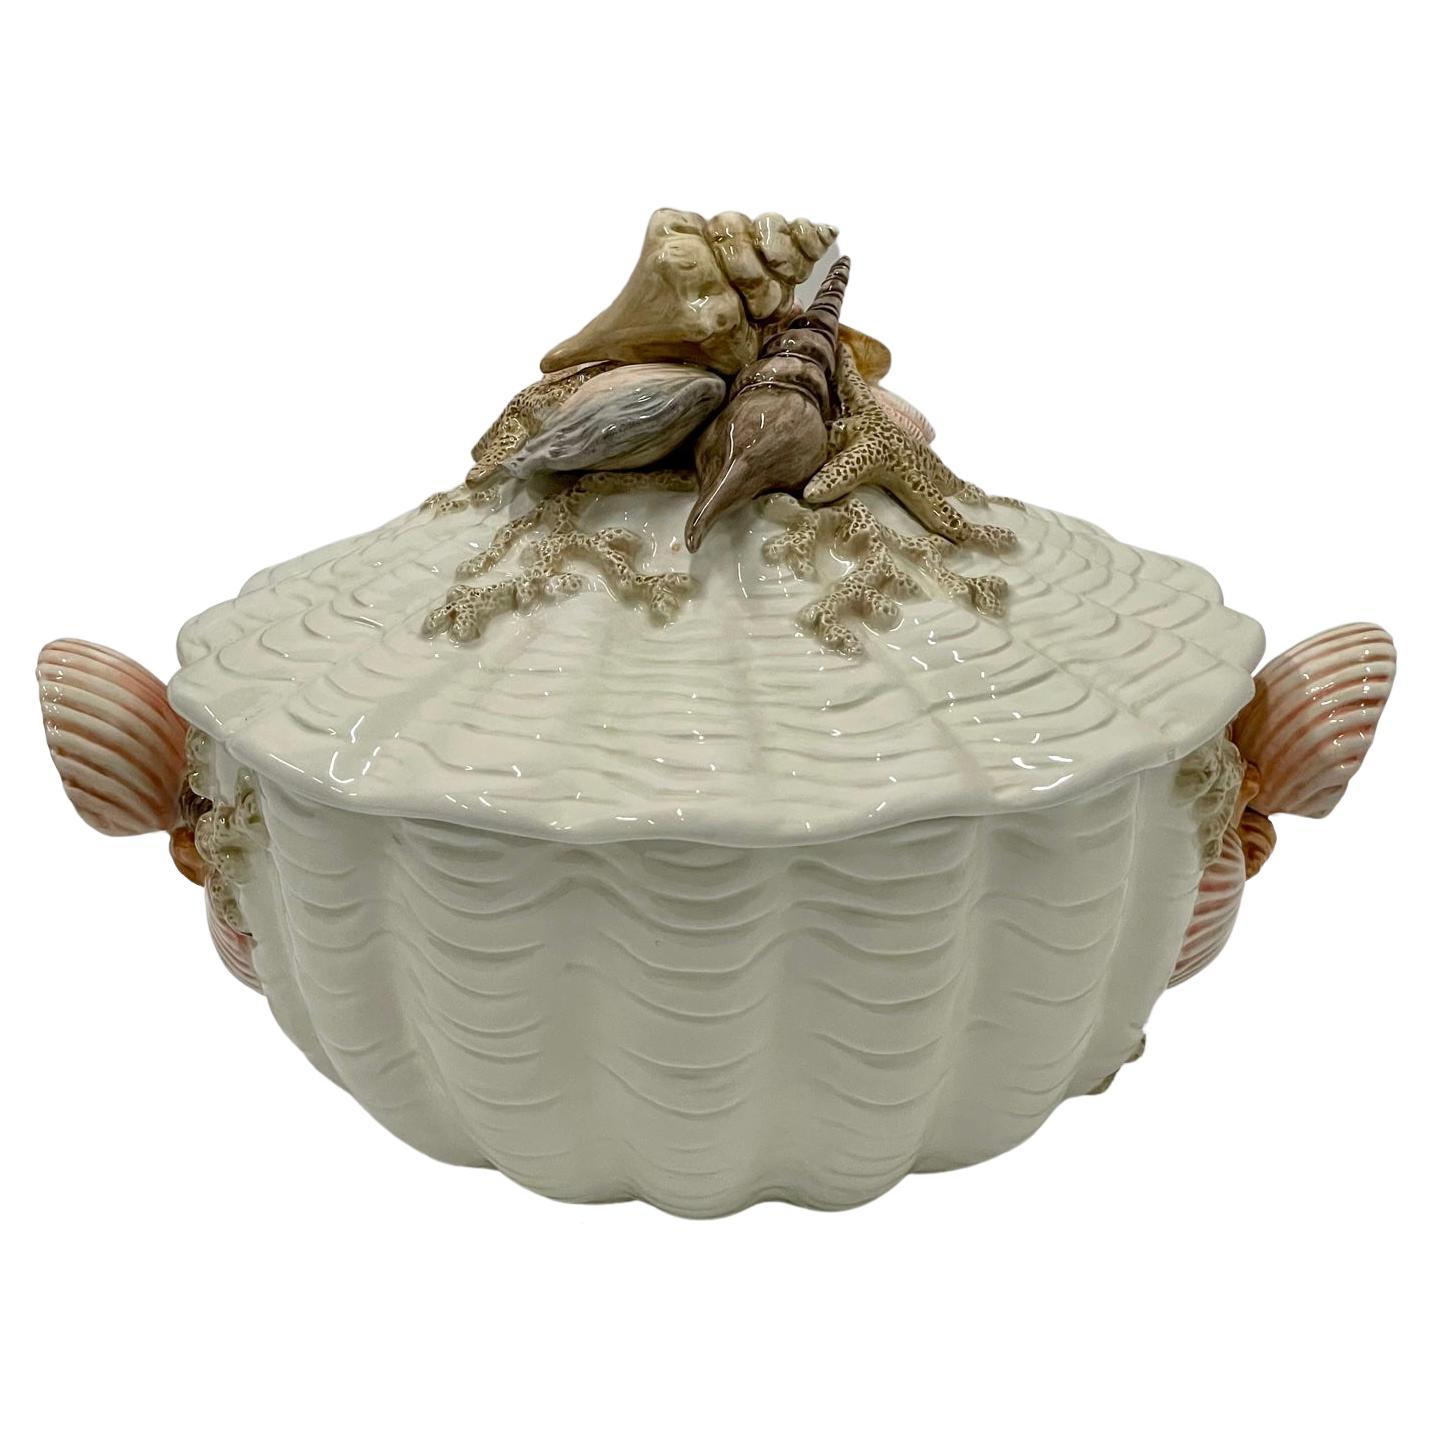 Beautiful Fitz & Floyd Tureen with Shell Decoration